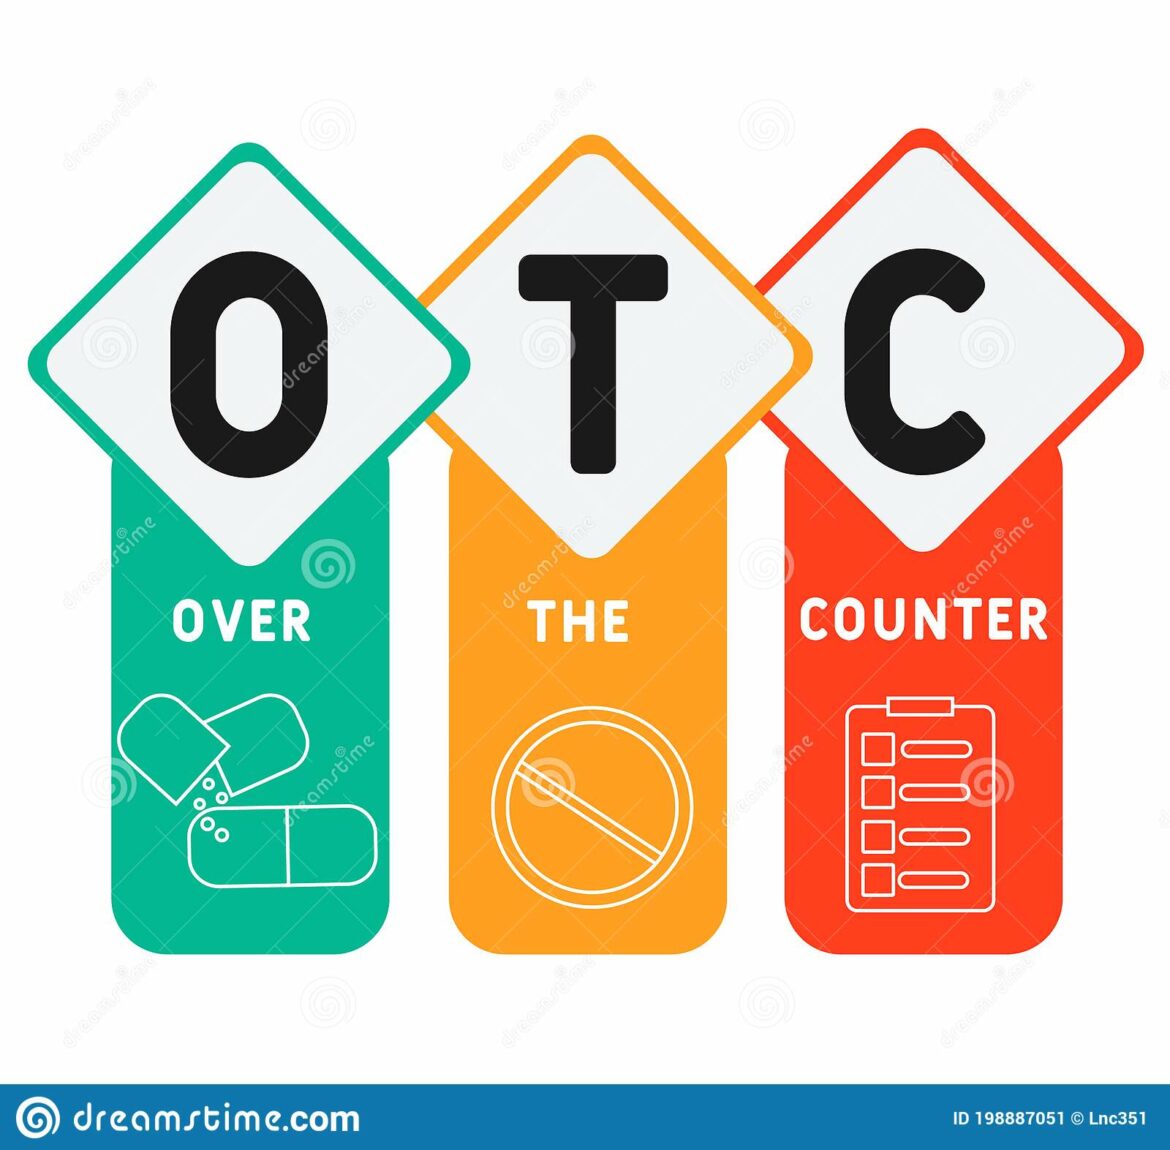 Over-the-Counter (OTC)